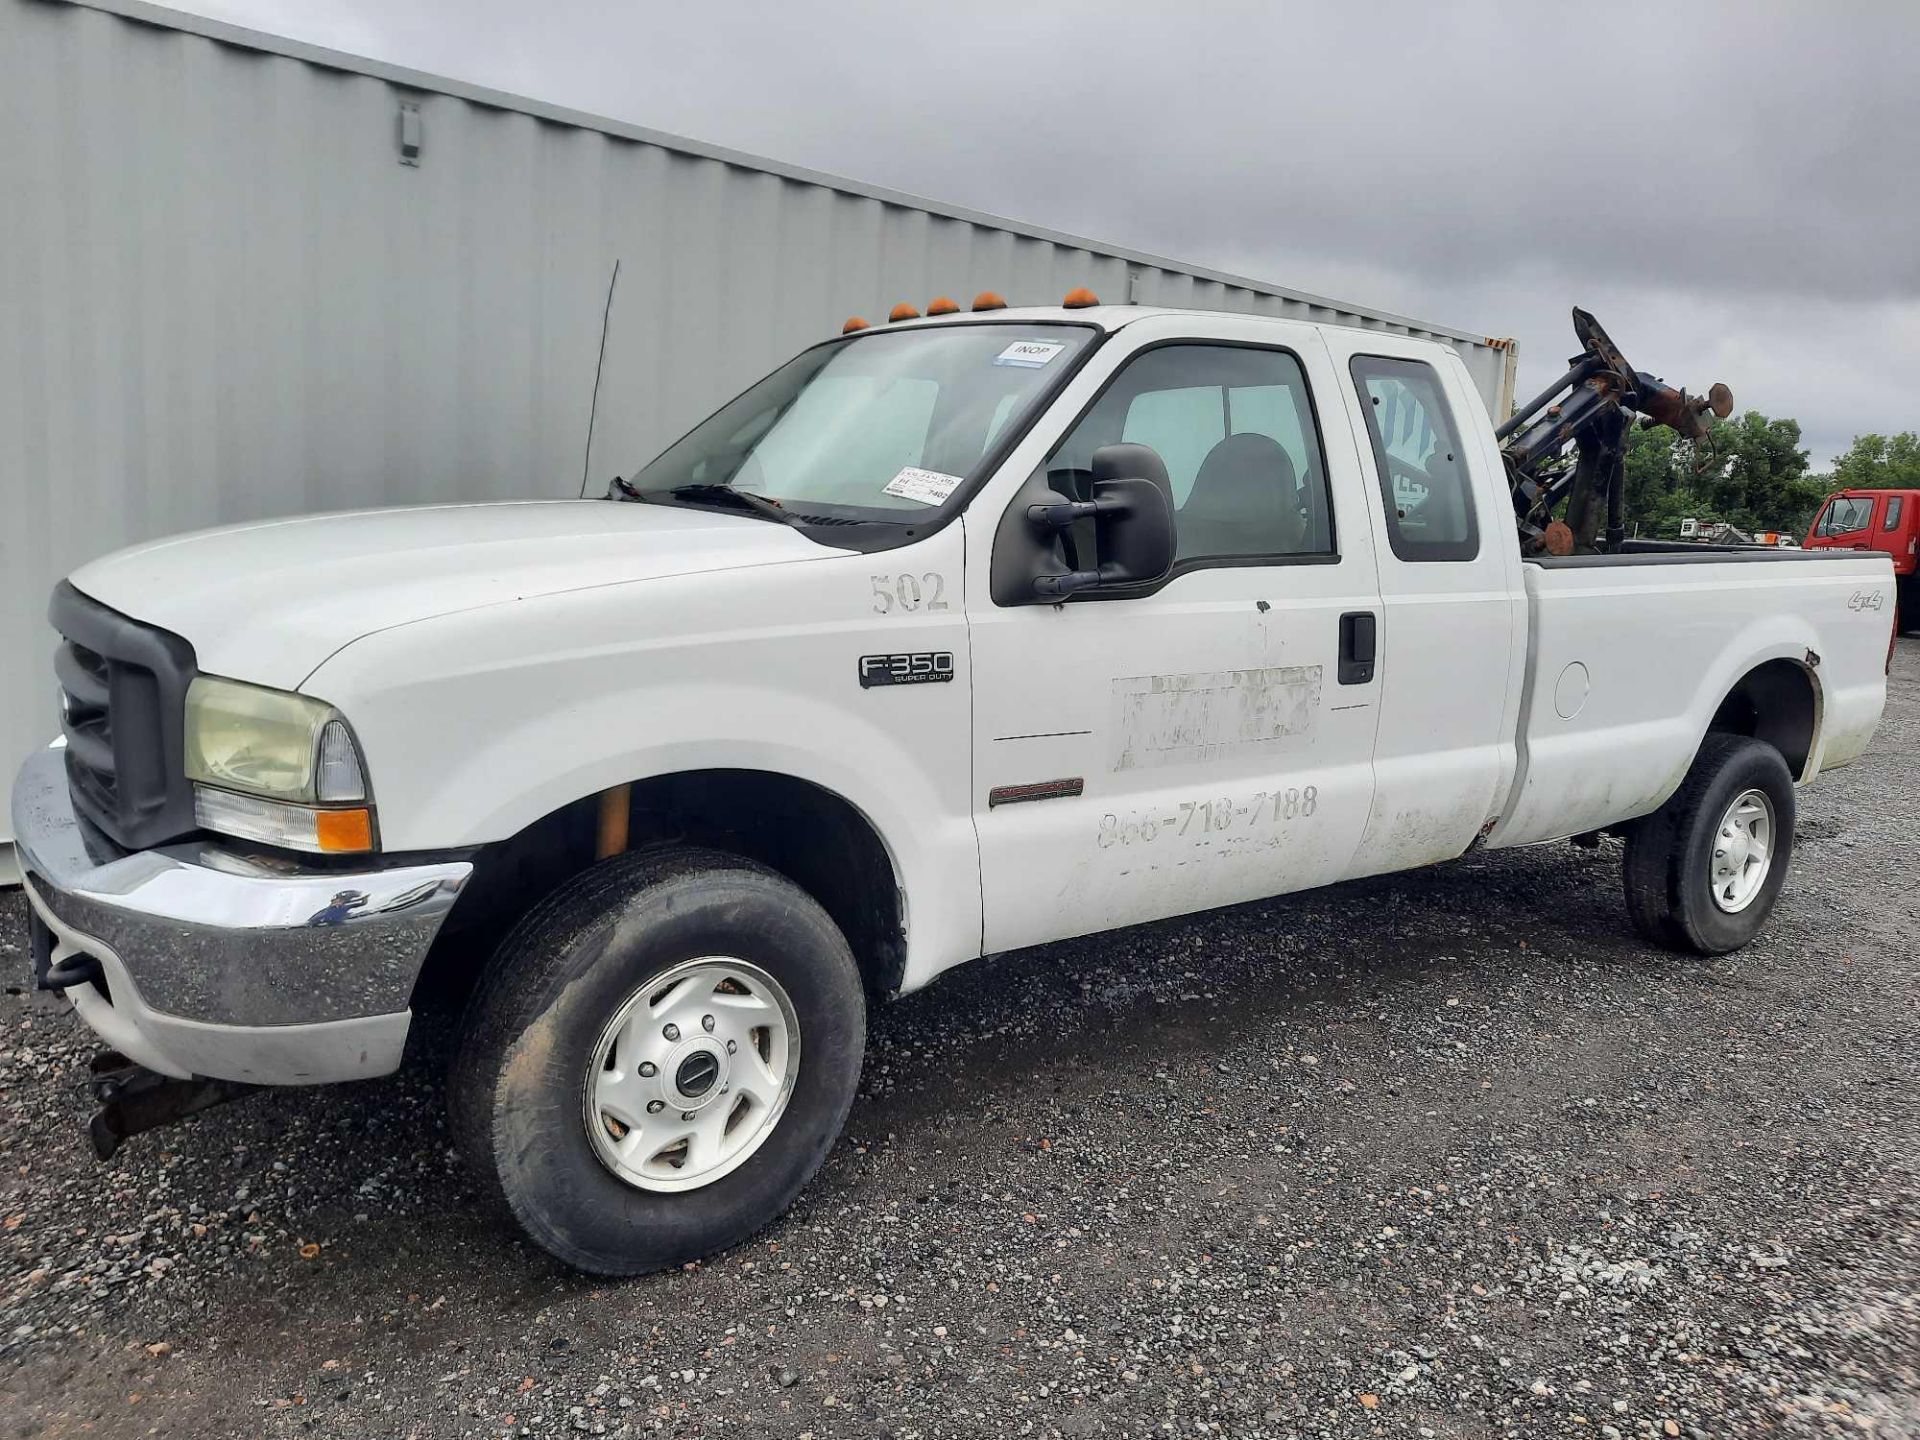 2003 Ford F350 XL Super Duty 4x4 (INOP) - Image 2 of 24